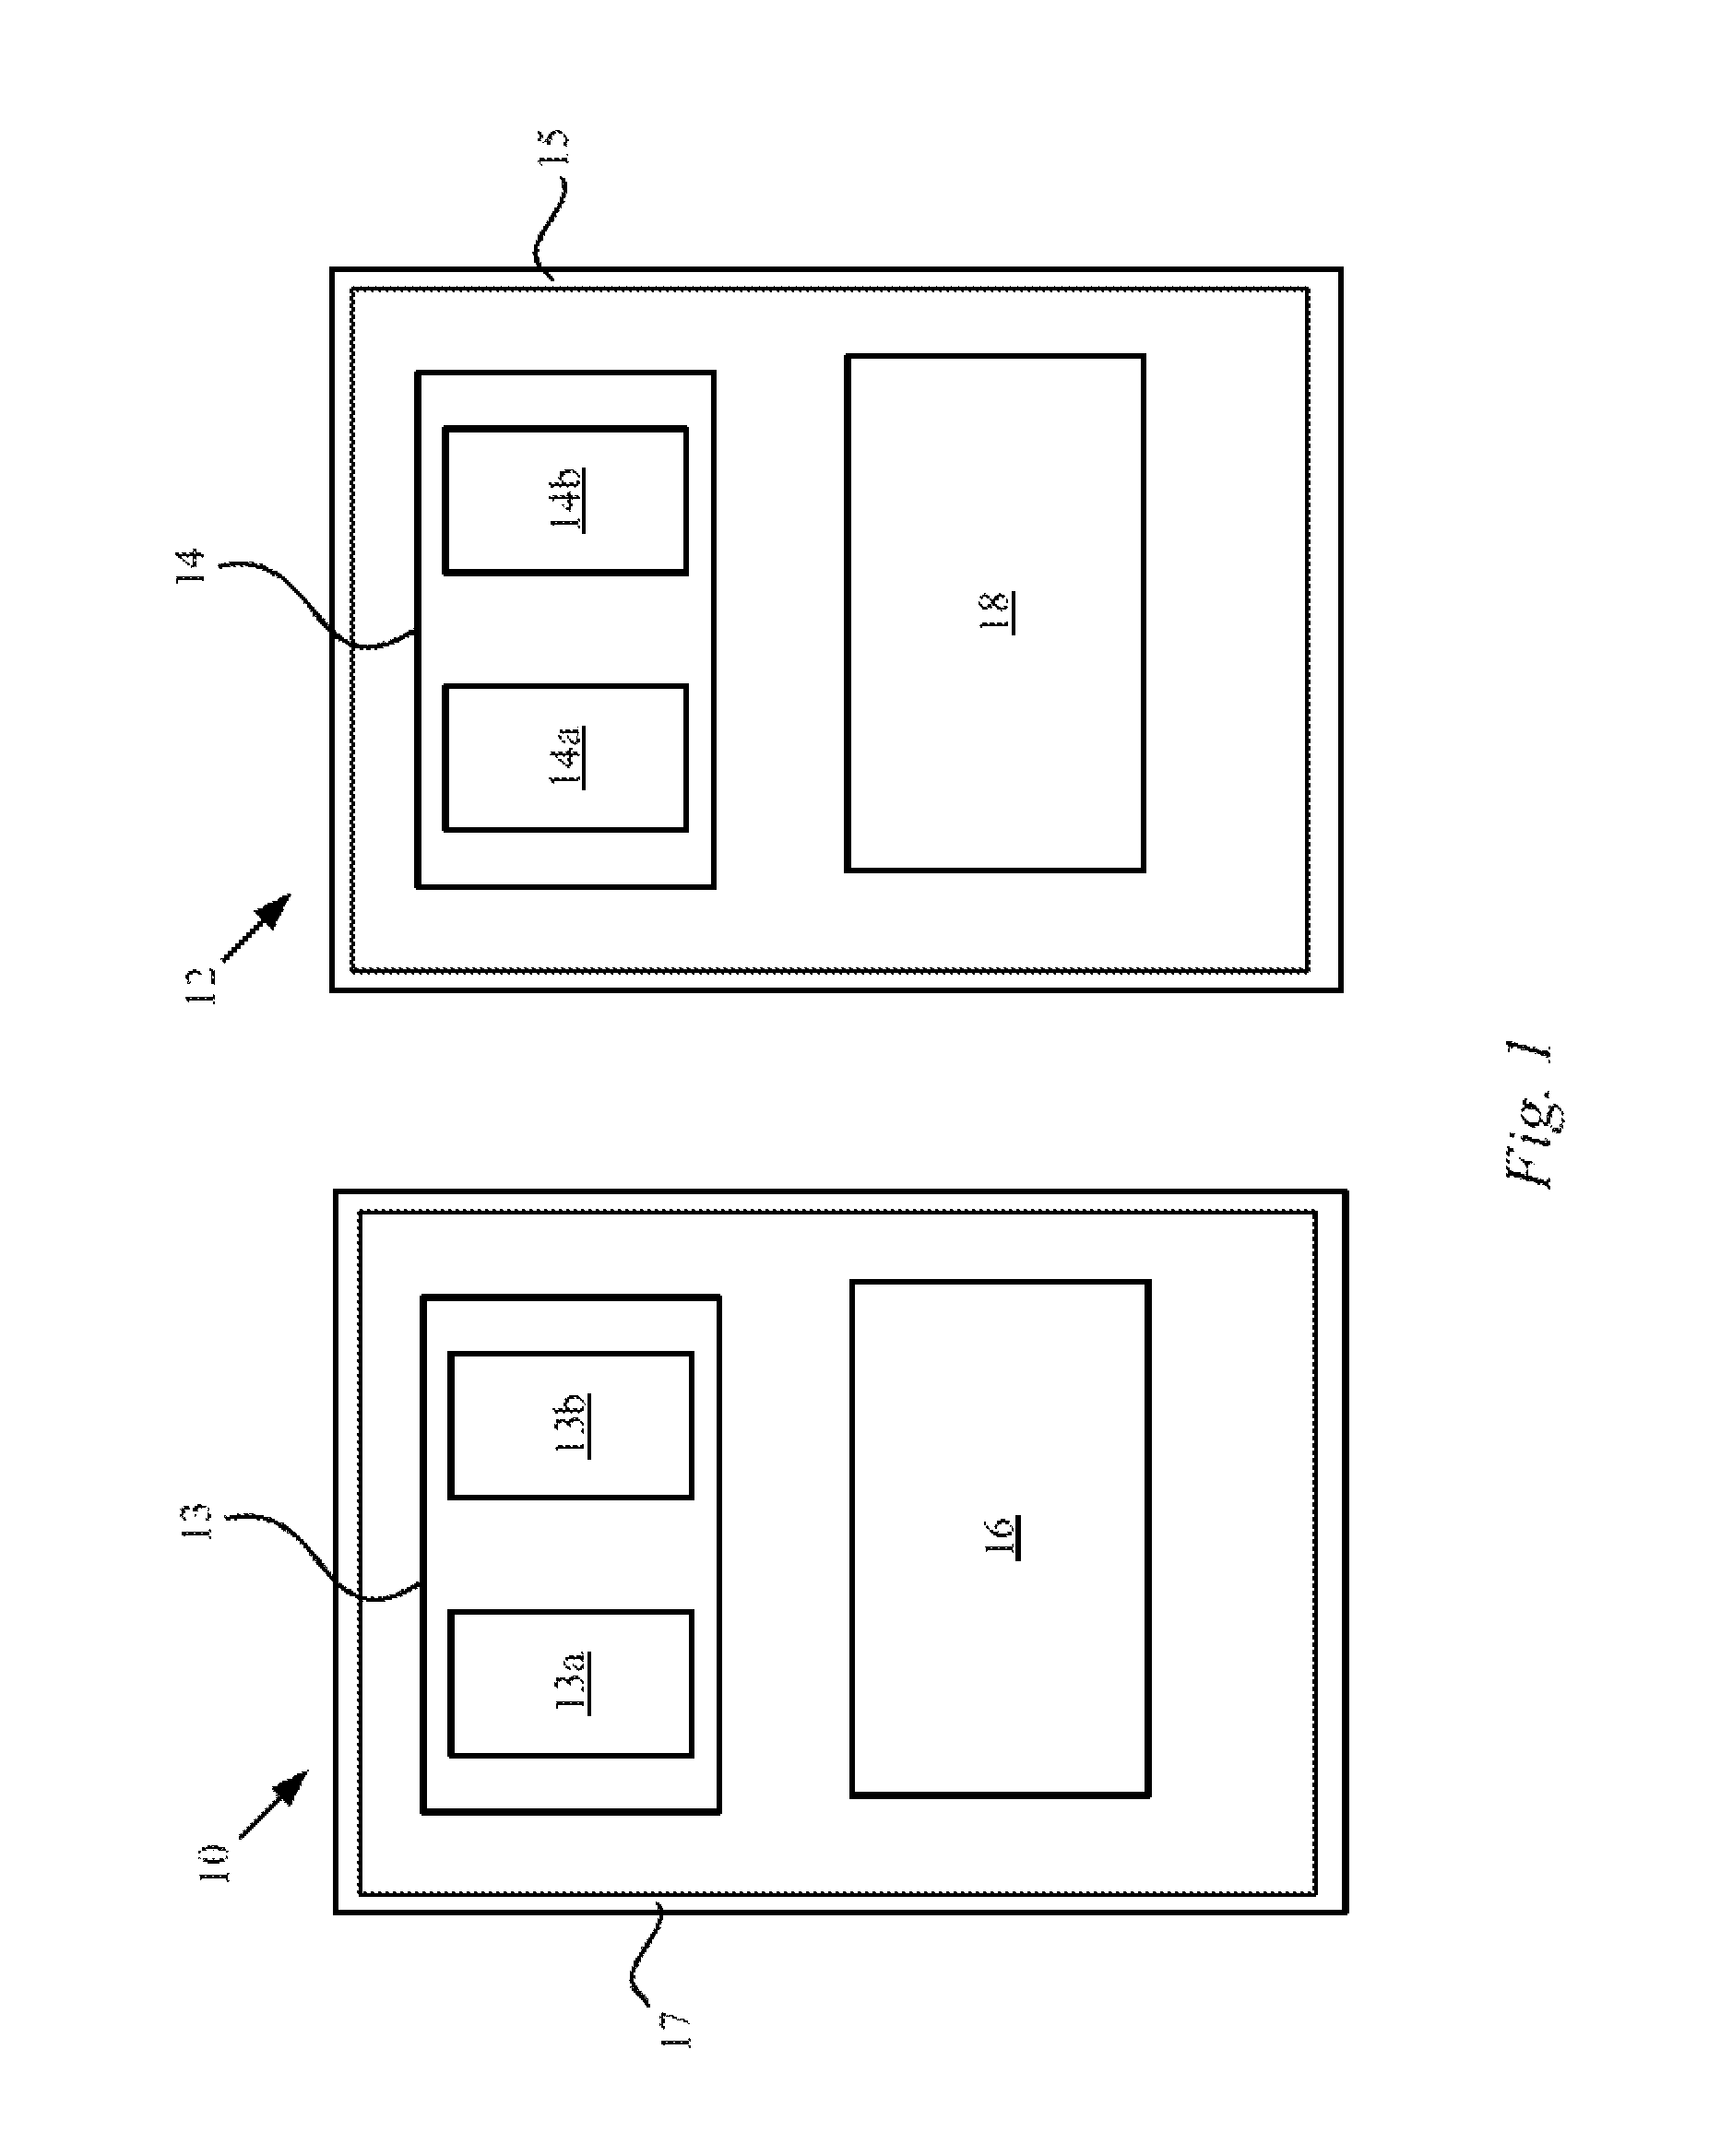 Electronic device with magnetic attachment